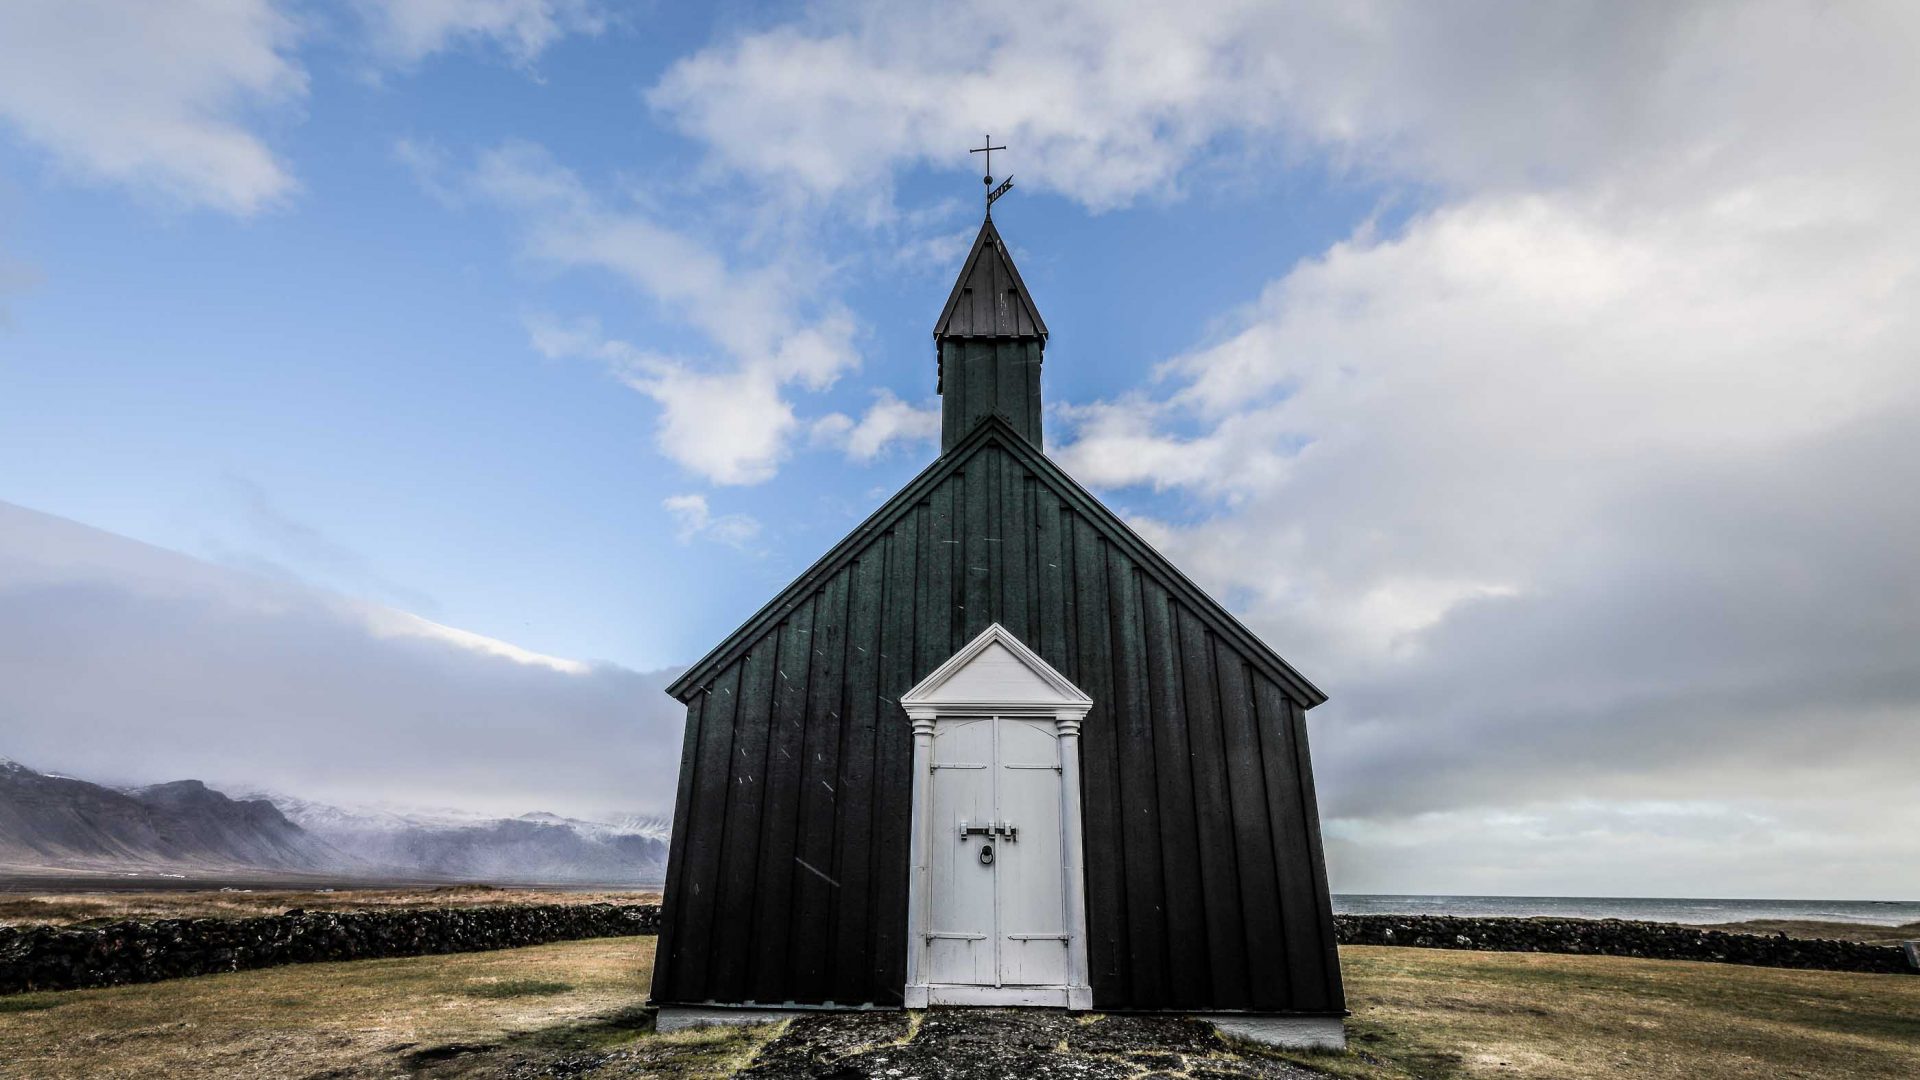 A church stands alone in the barren landscape of the Arctic North.